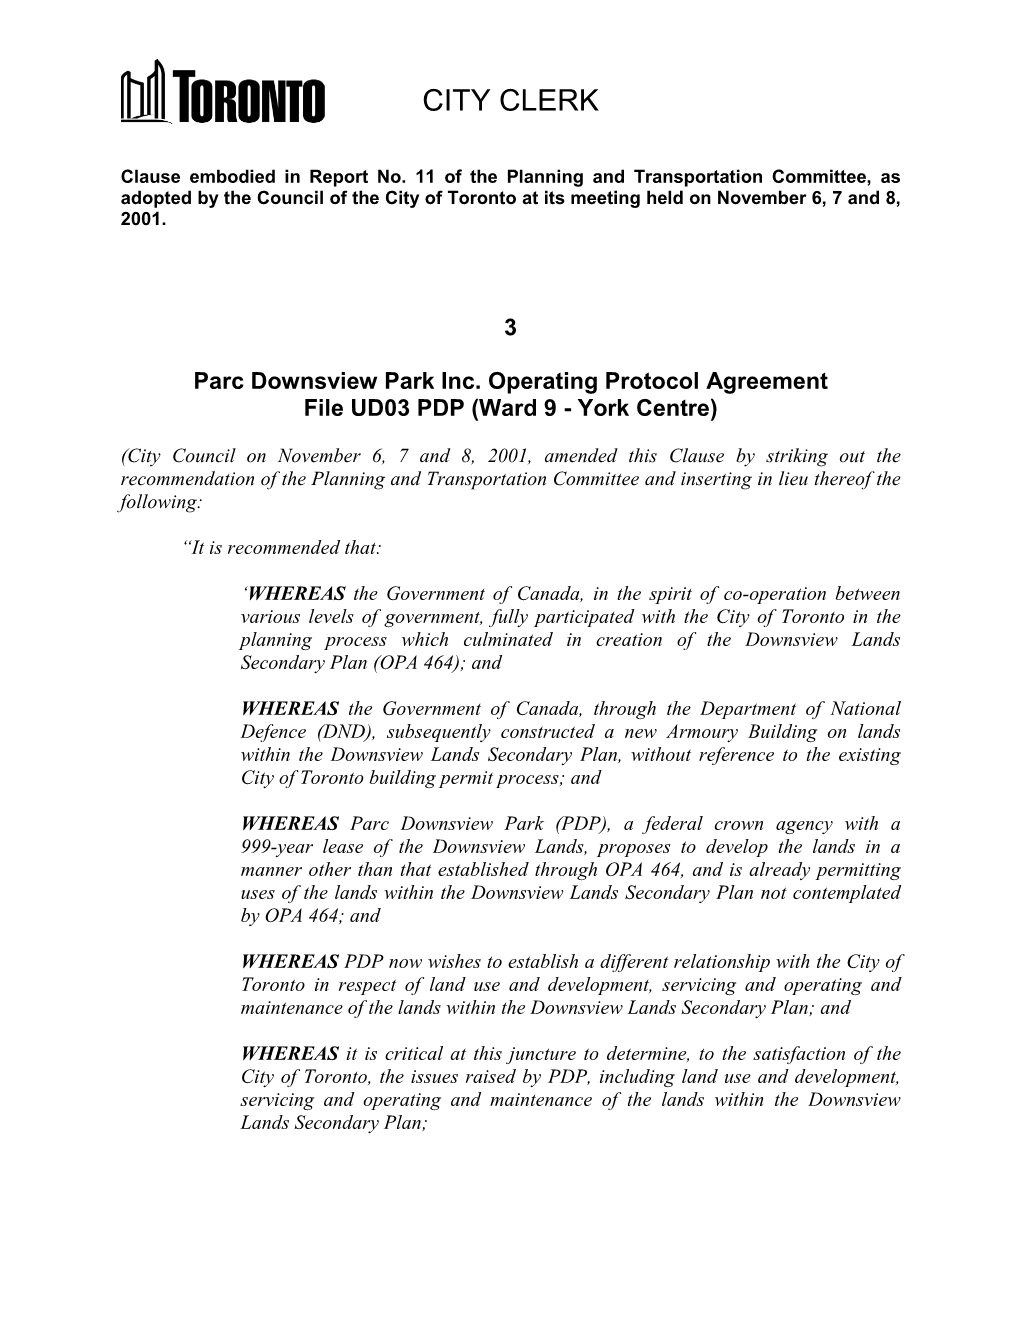 3 Parc Downsview Park Inc. Operating Protocol Agreement File UD03